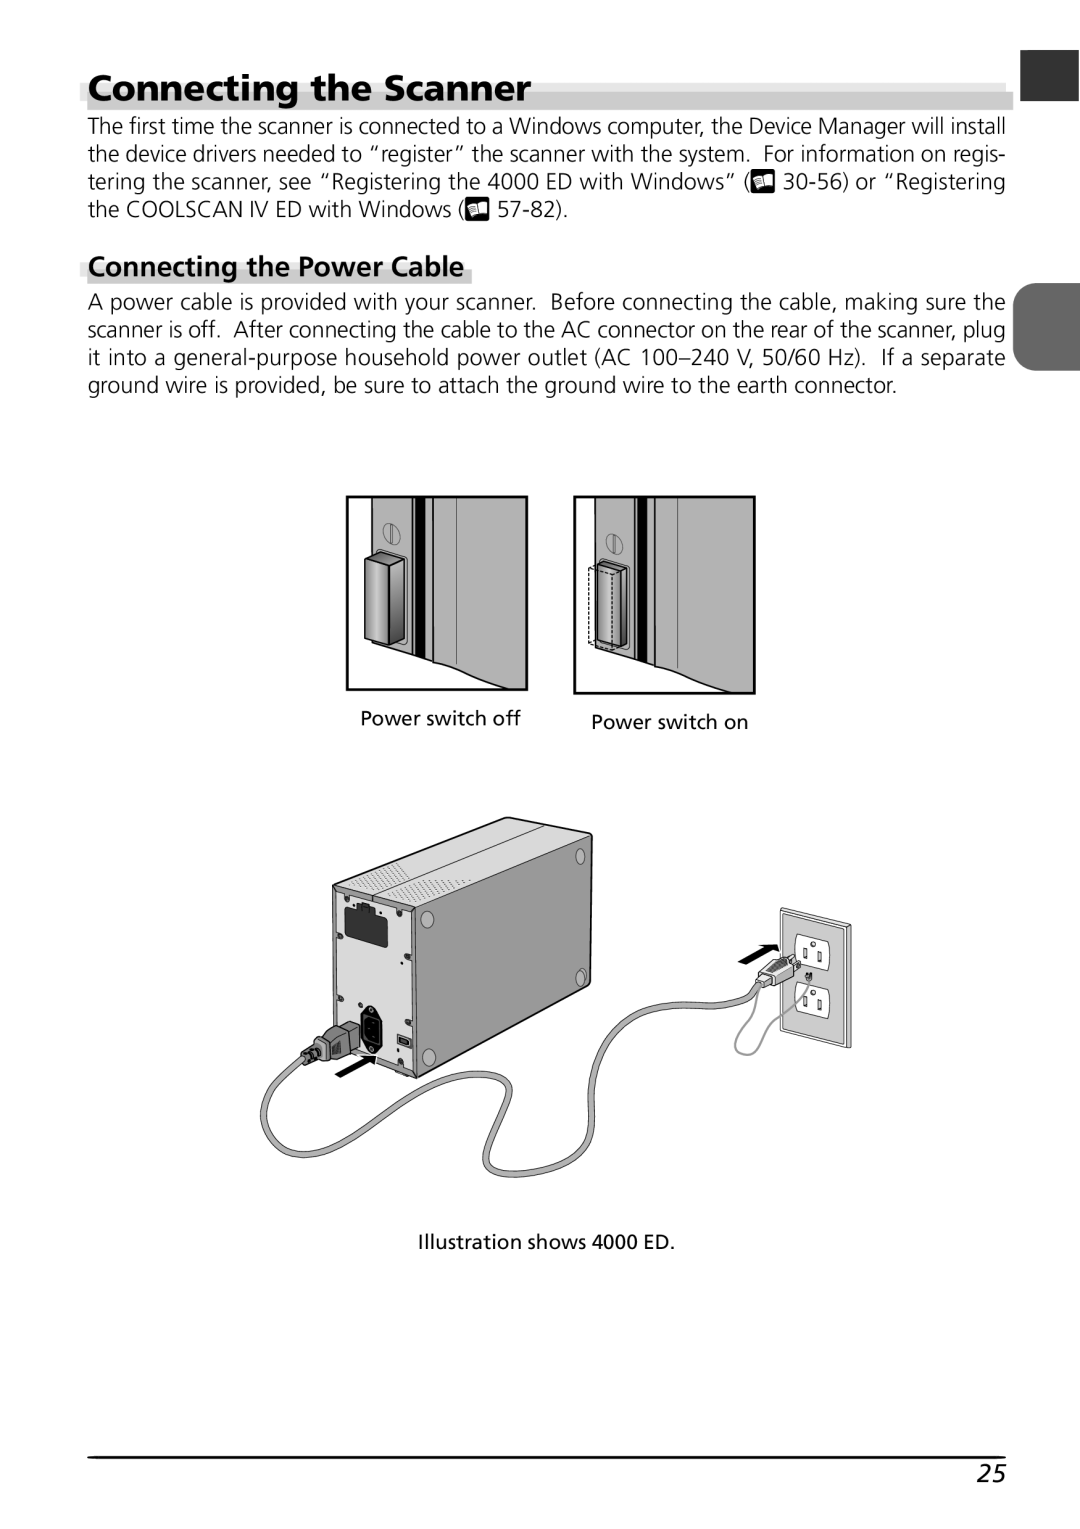 Nikon LS4000 user manual Connecting the Scanner, Connecting the Power Cable 